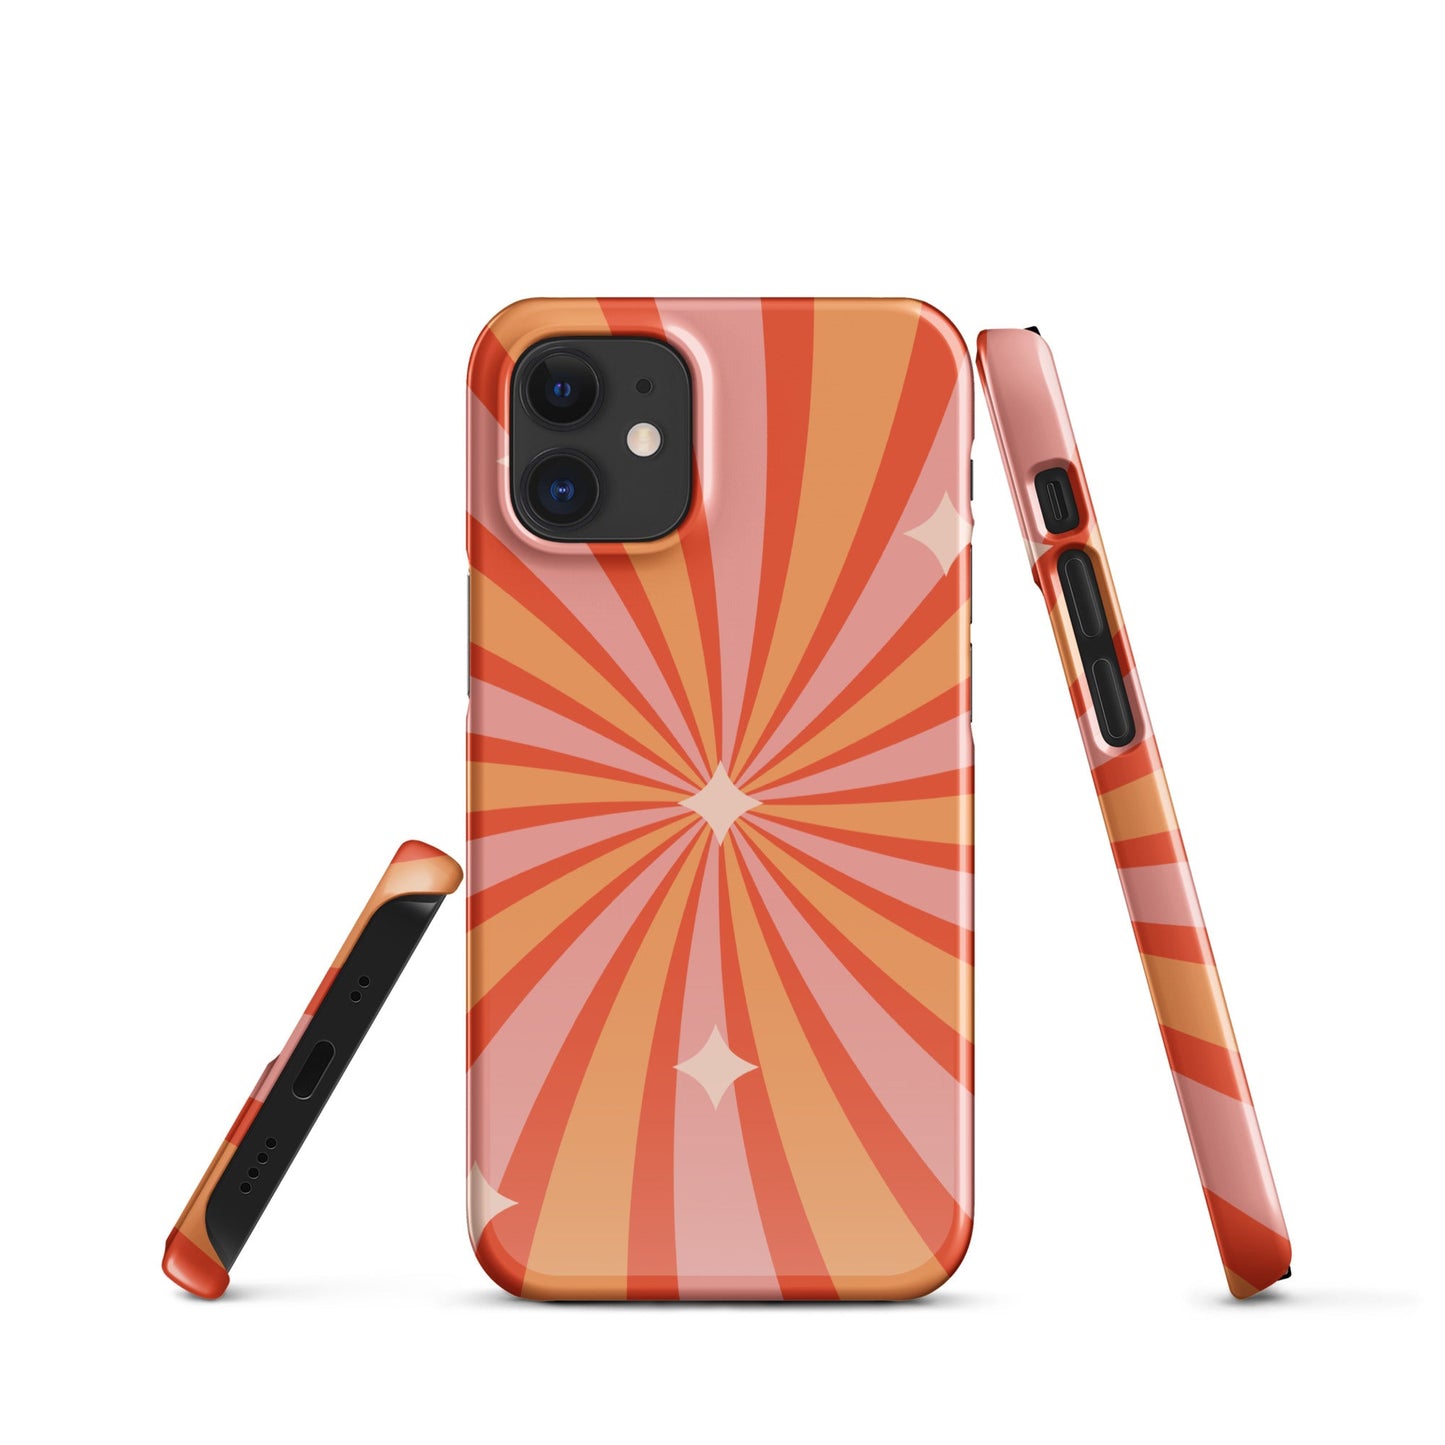 Groovy Snap Case for iPhone - Retro Chic Protection and Style